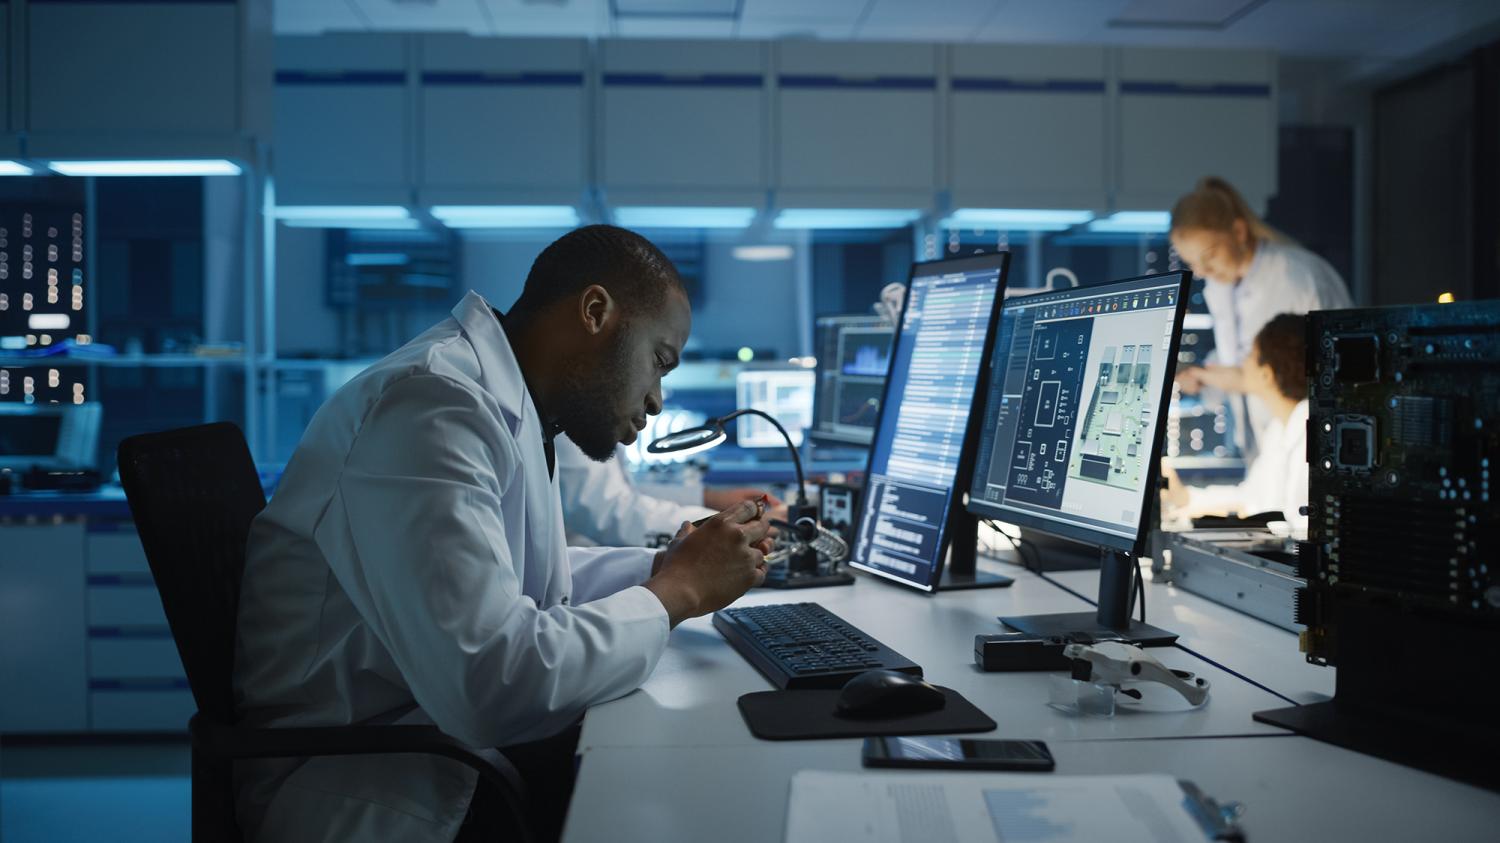 Modern Electronics Development Facility: Black Engineer and Diverse Team of Multi-Ethnic Scientists Work on Computers, Design Industrial PCB, New Generation Silicon Microchips, Semiconductors Photo: Shutterstock